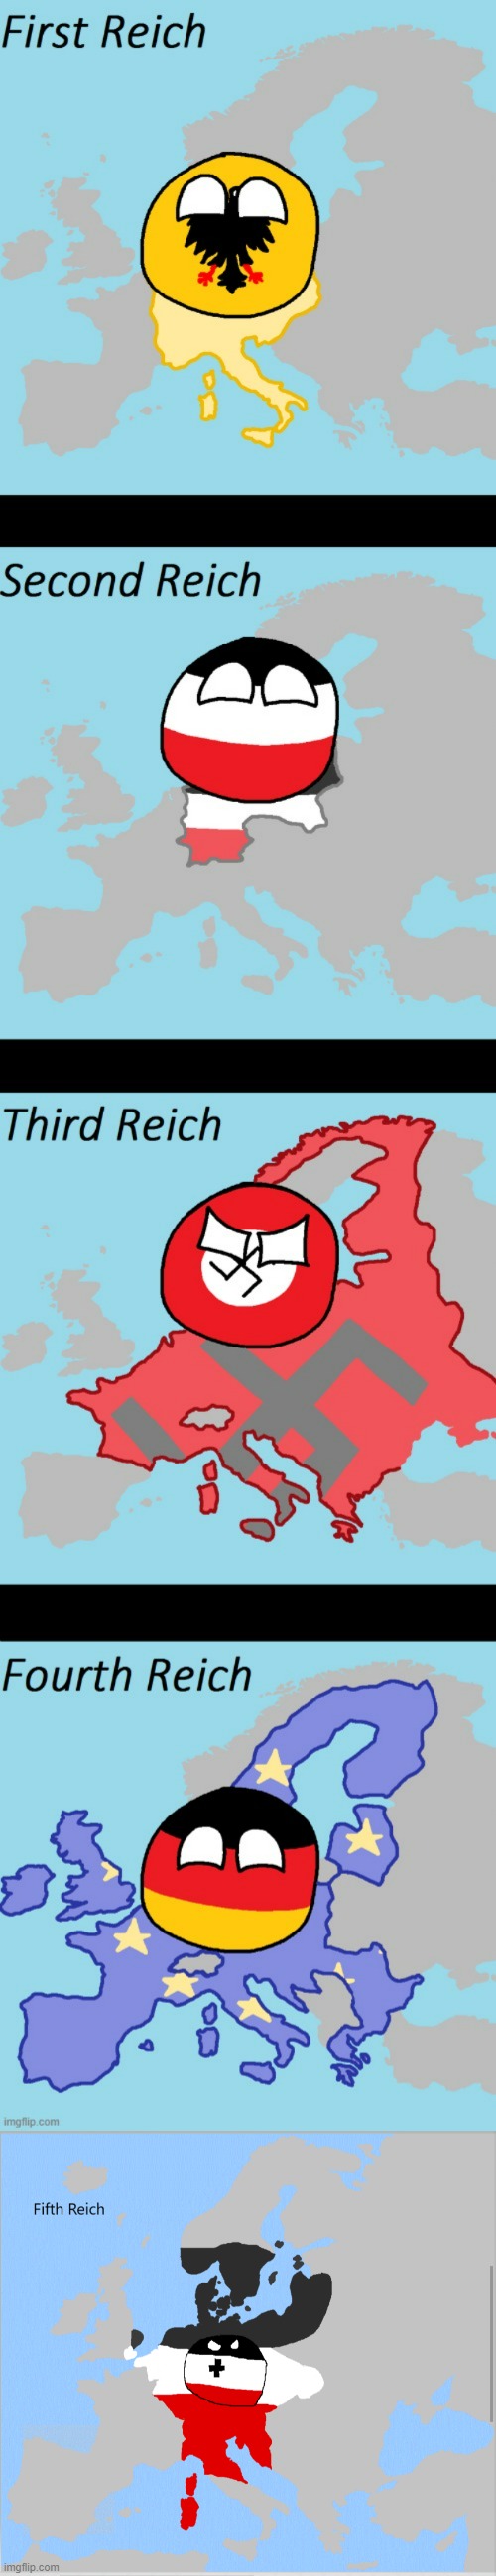 The Fifth Reich of Germany | image tagged in germany,empire,reich | made w/ Imgflip meme maker